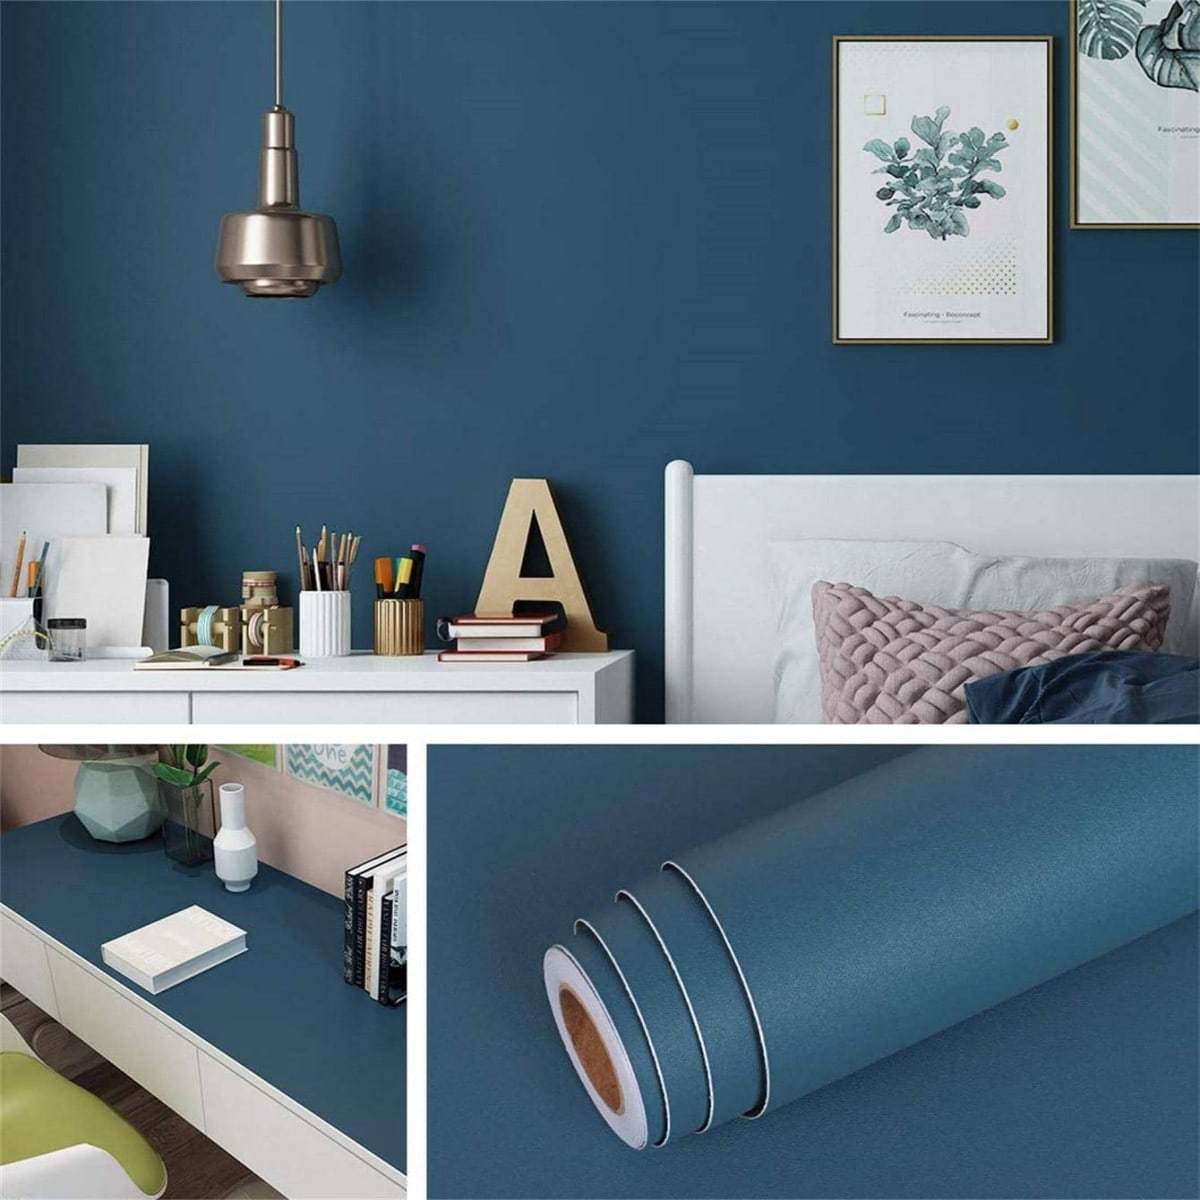 

1 Roll Blue Wallpaper Peel And Stick 15.7"x196.85" Solid Blue Wall Paper Pull And Stick Contact Paper For Cabinets Waterproof Self-adhesive Wall Covering For Bedroom Countertop Desk Decor